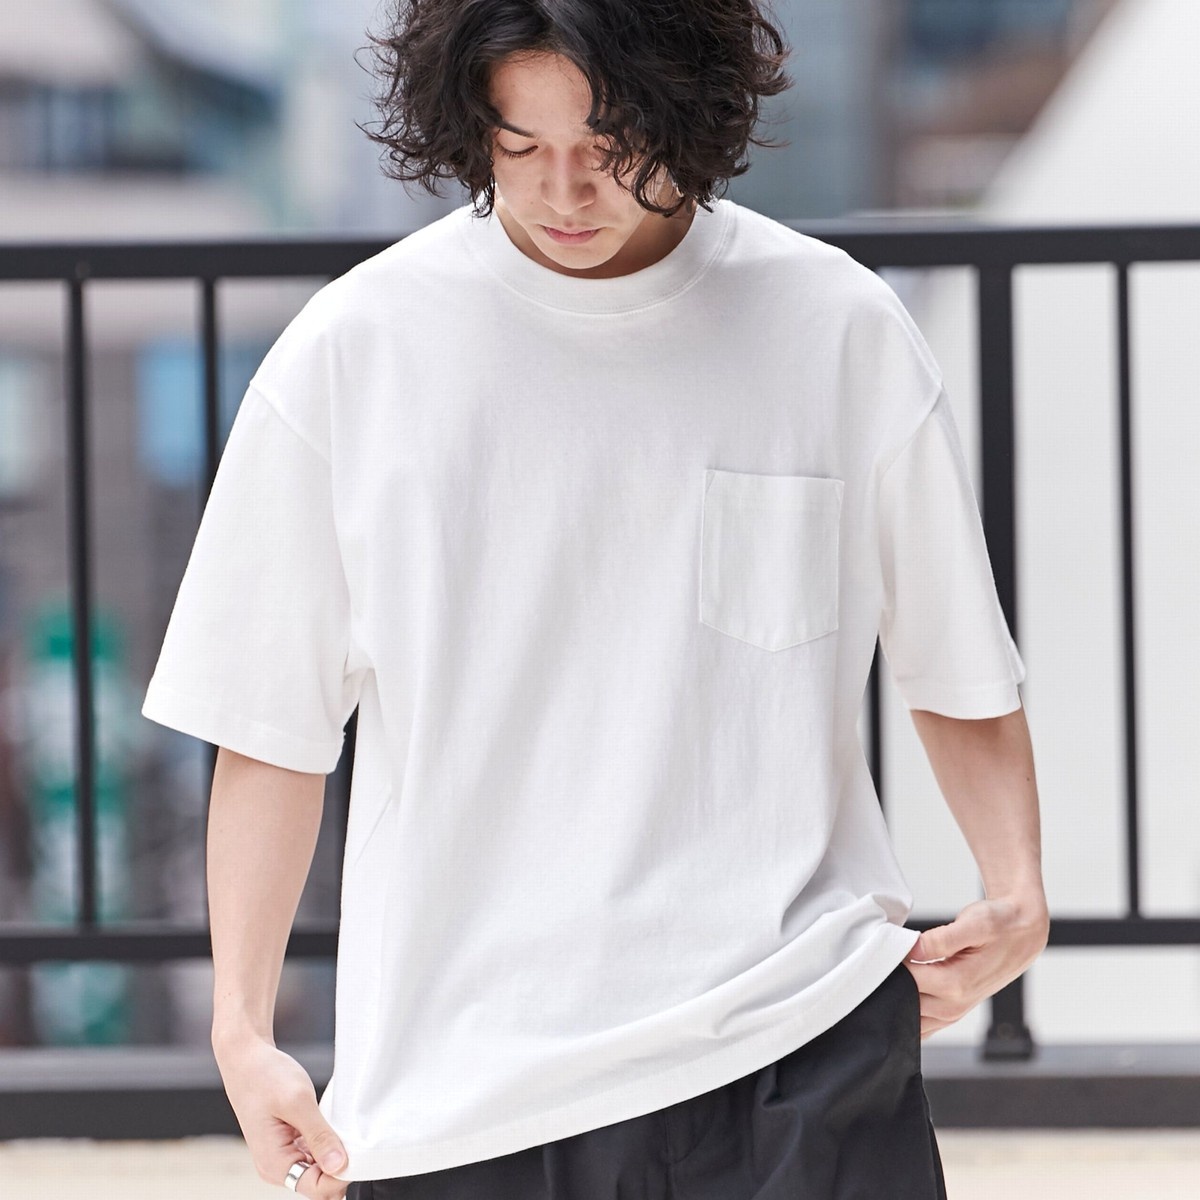 A\u0026Gコットン100%Tシャツmade in Italy - agedor.ma